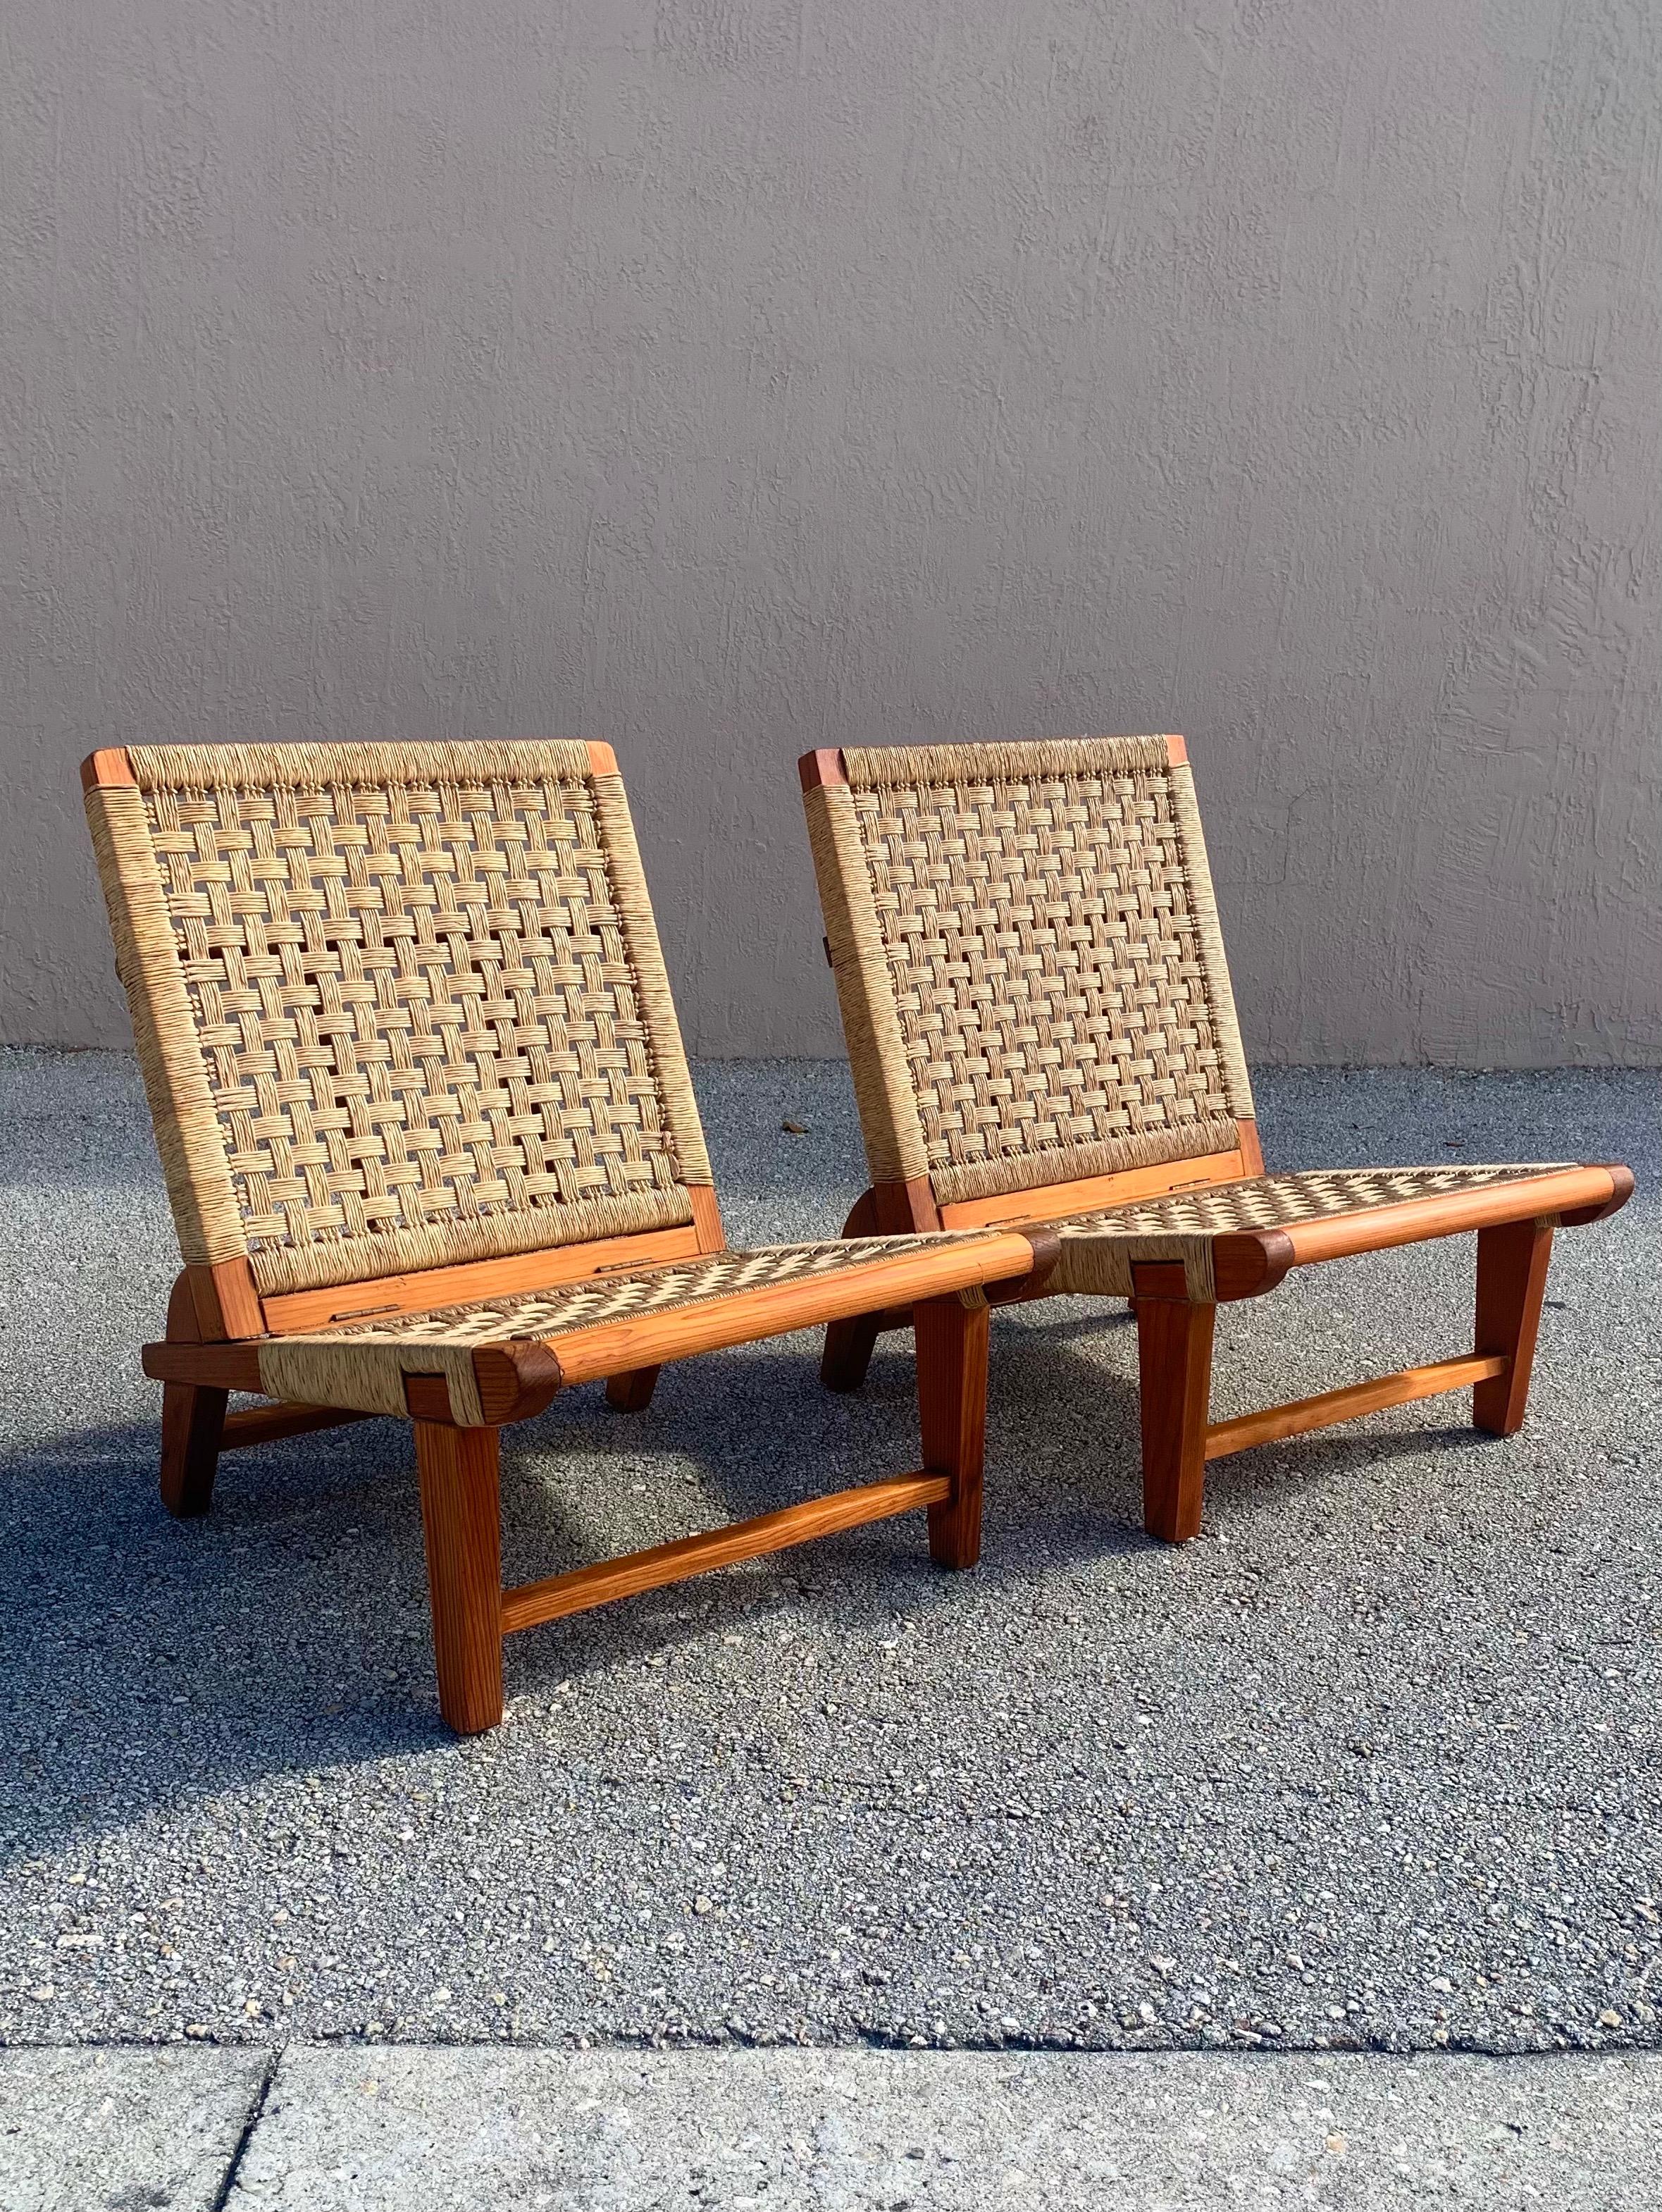 A pair of folding chairs by Michael van Beuren for his company Domus of Mexico. Made from mahogany and woven rattan cord. Chairs are made to have their back support fold down. 

Circa 1950. Lightly restored in an effort to extend its life and make